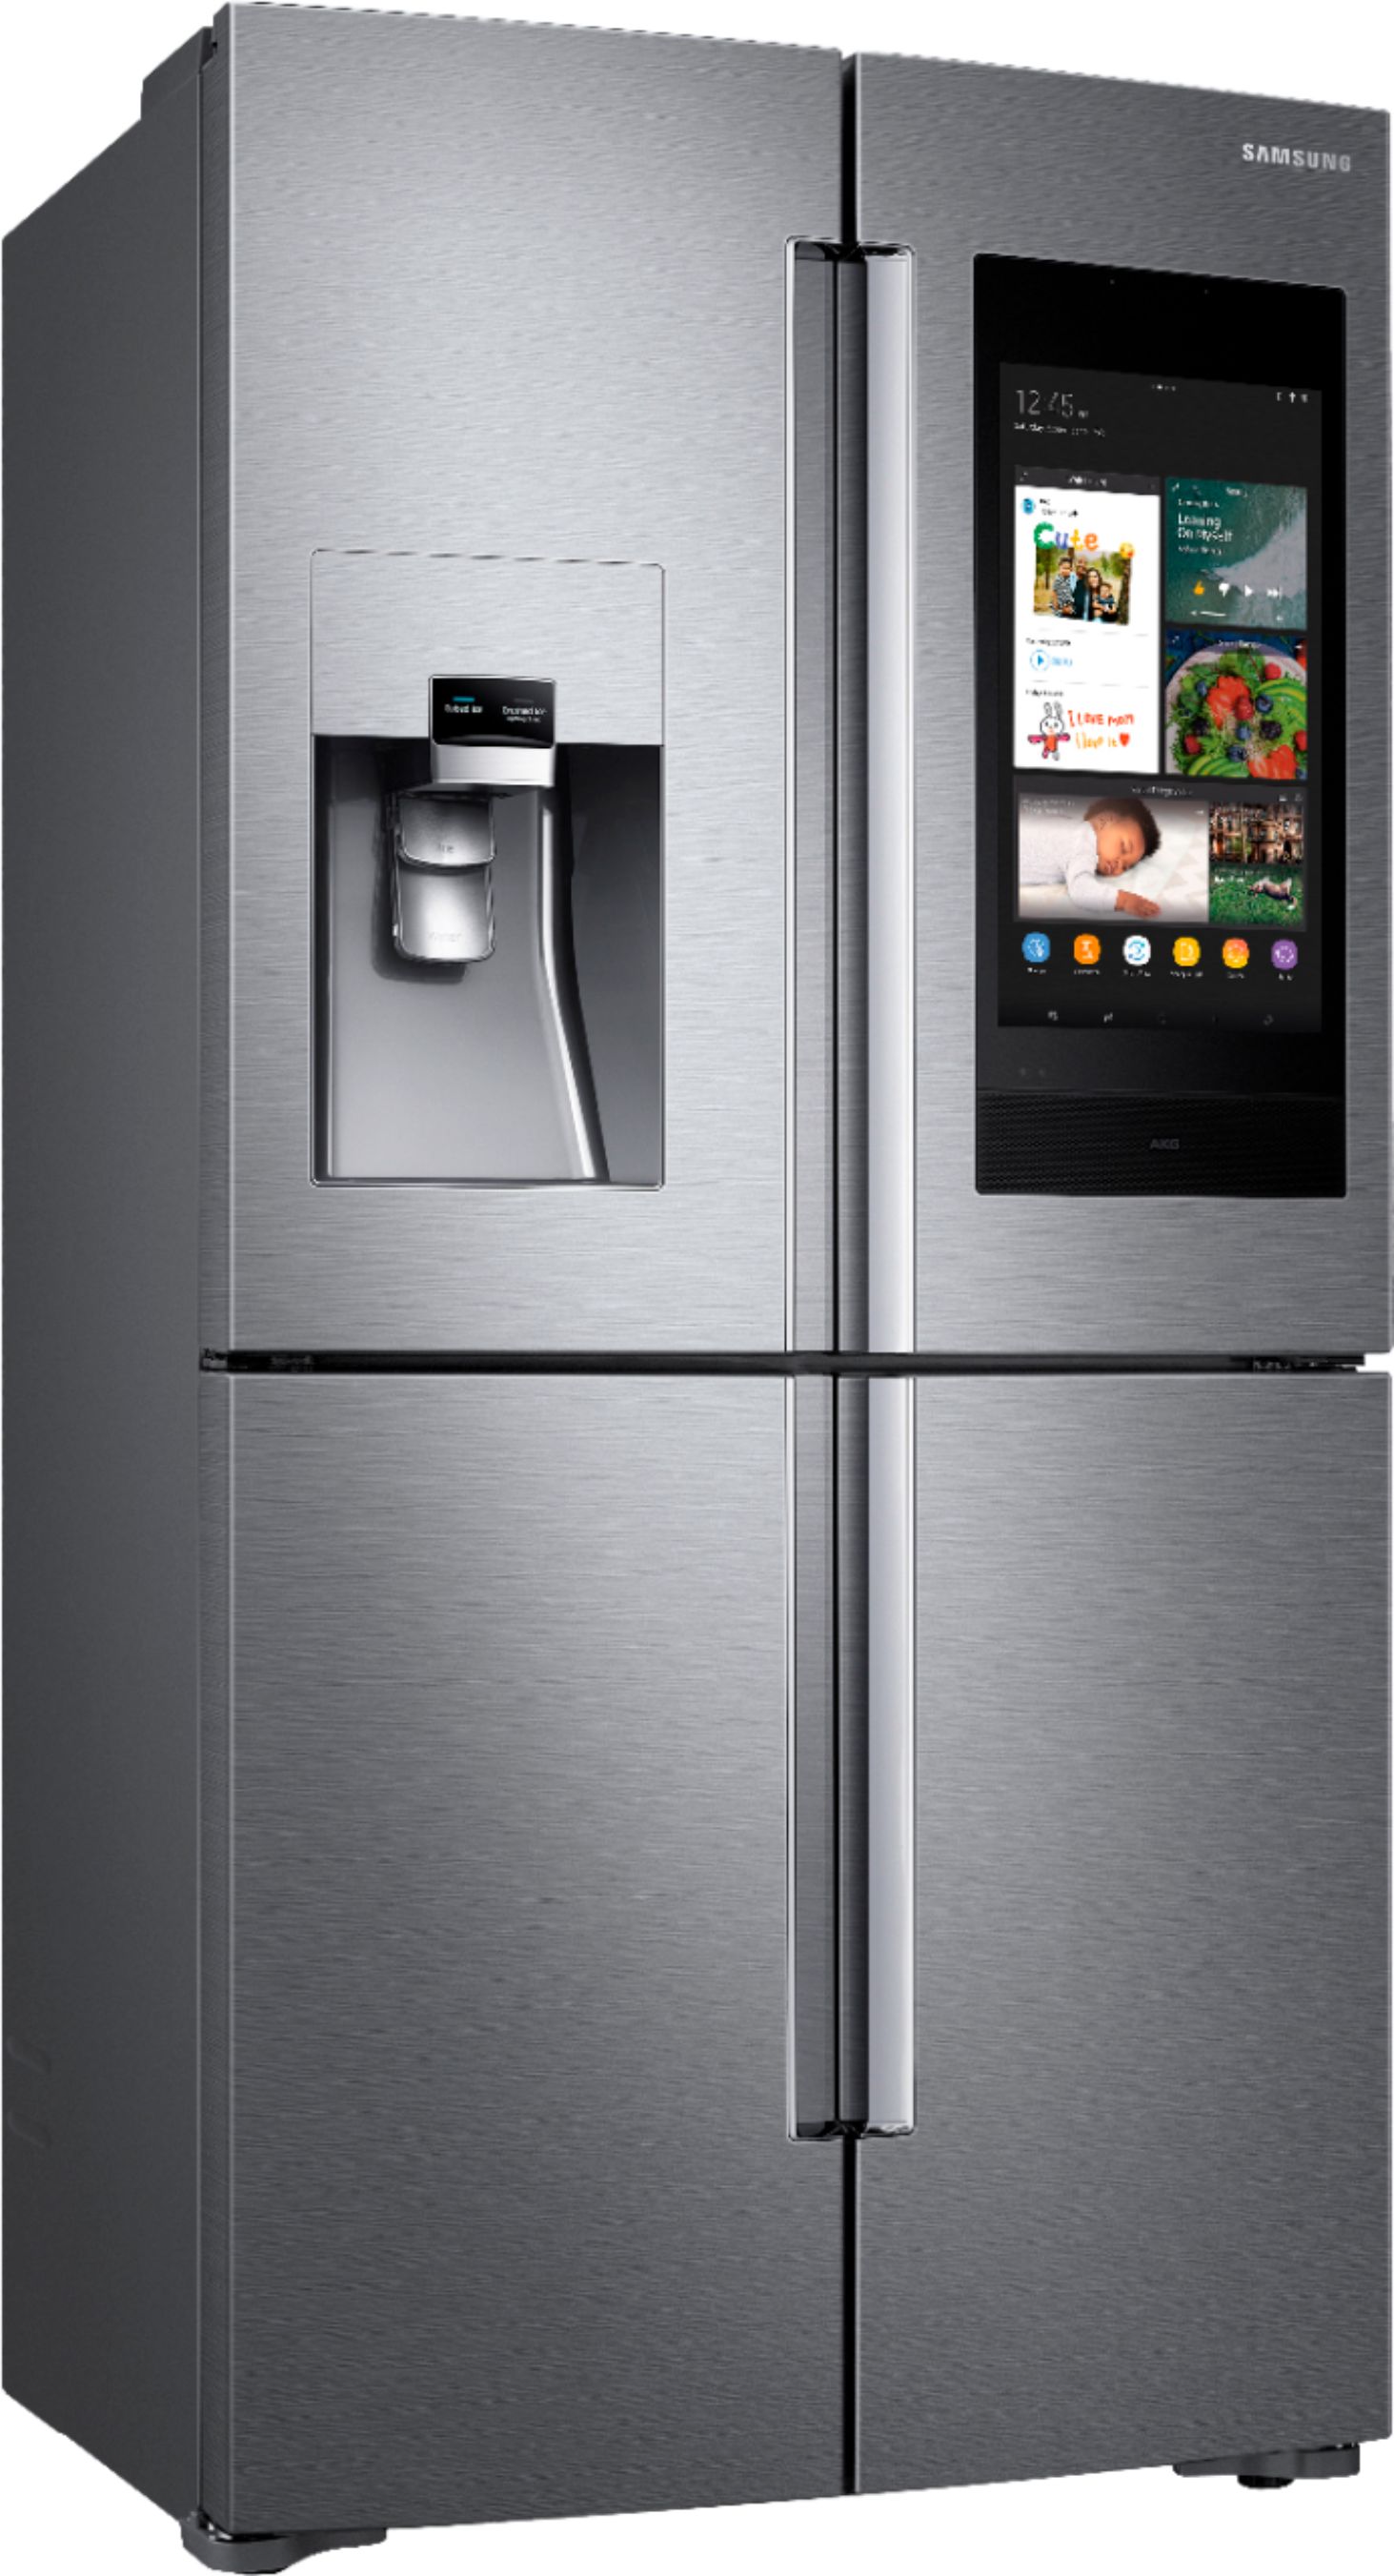 Samsung's Wi-Fi oven and touchscreen fridge join the CNET Smart